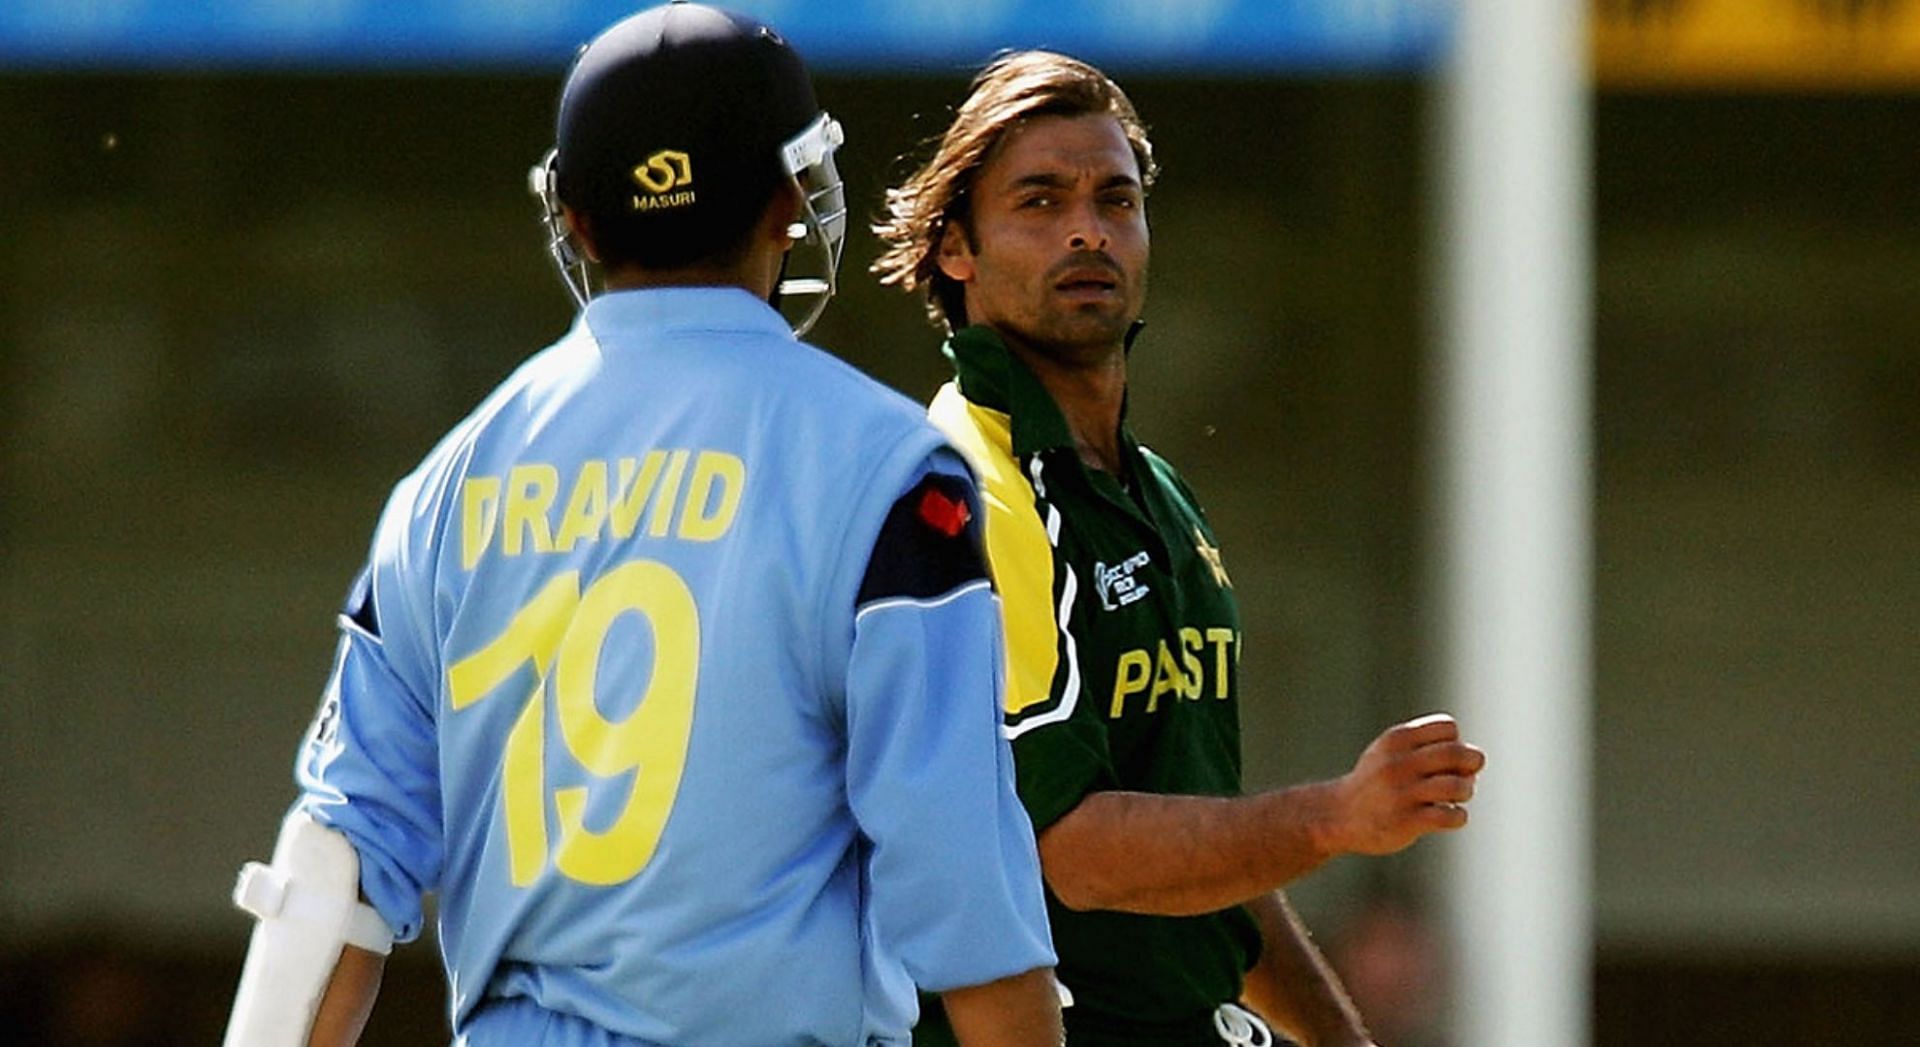 A still from Akhtar and Dravid&#039;s infamous fight in an ODI match. Pic credits: Latestly